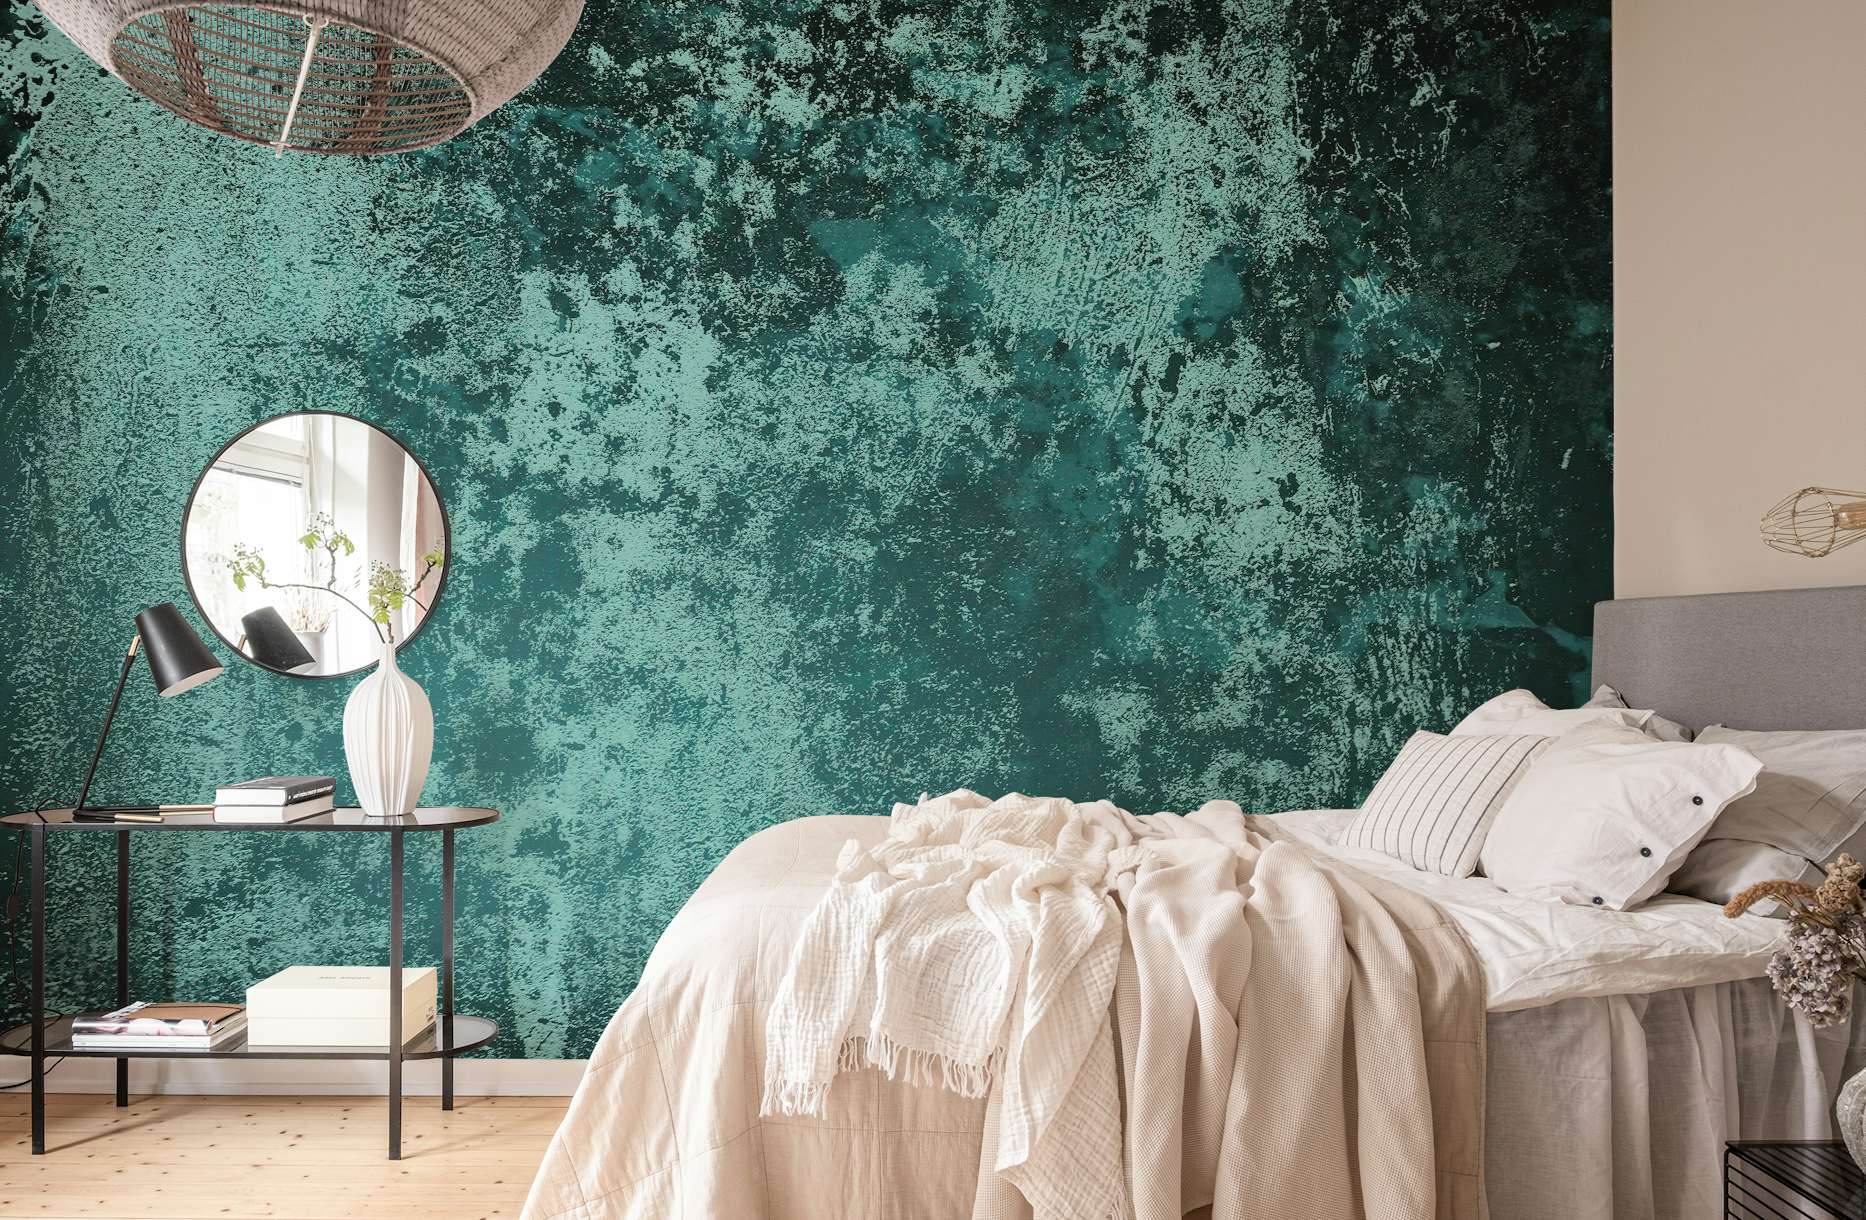 Concrete texture in teal blue wallpaper